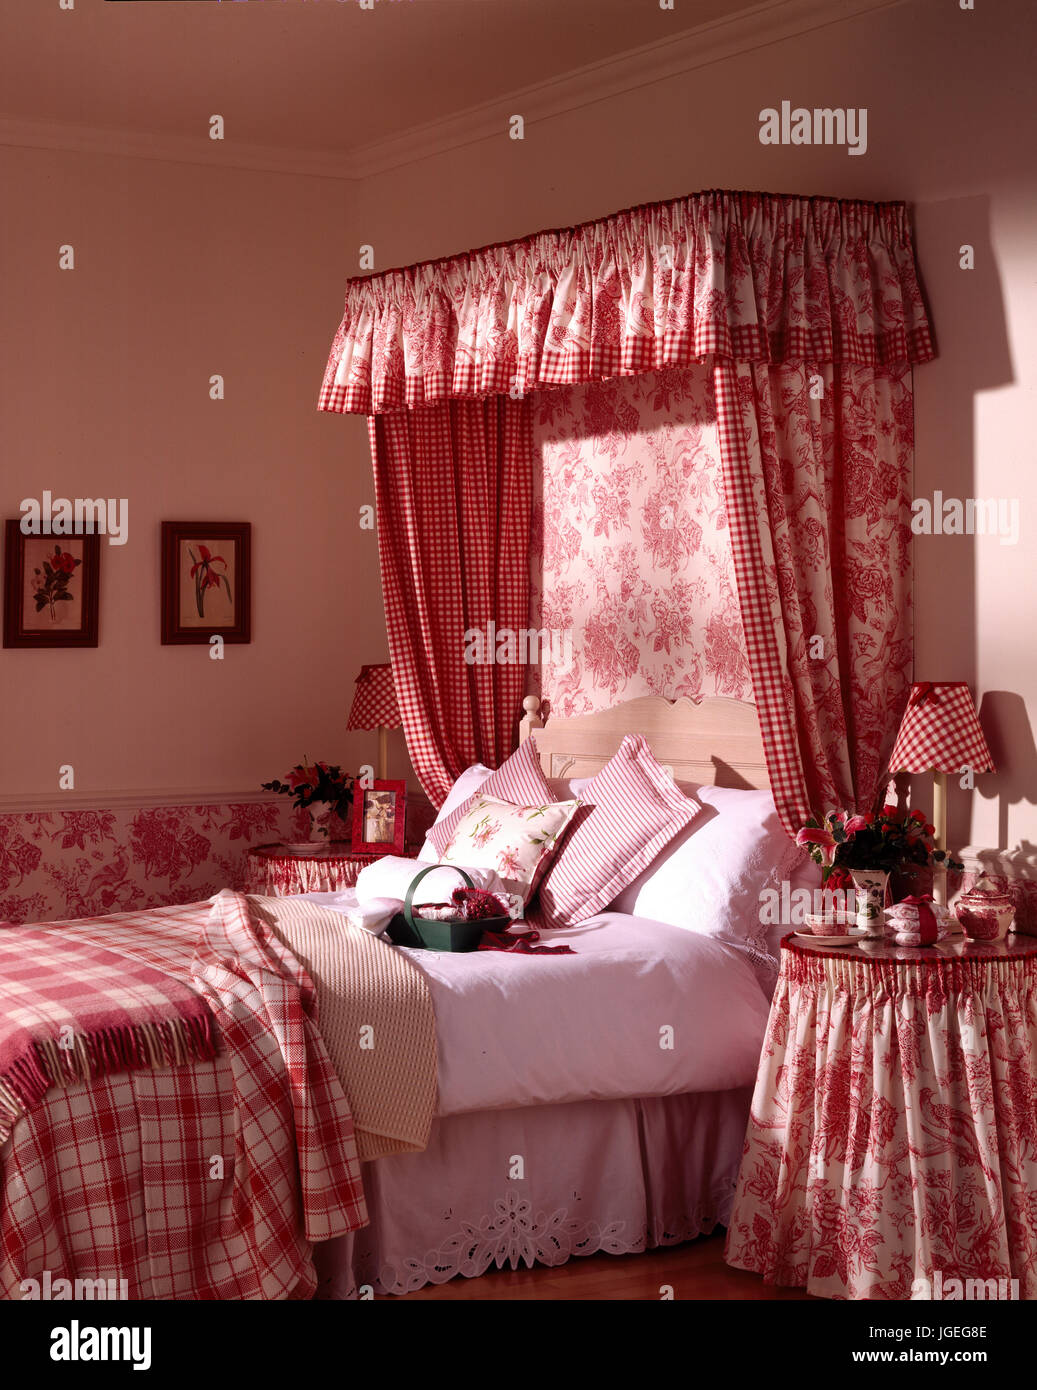 Double bed with deep pink fabric bed hangings to match print on wall below dado. Stock Photo